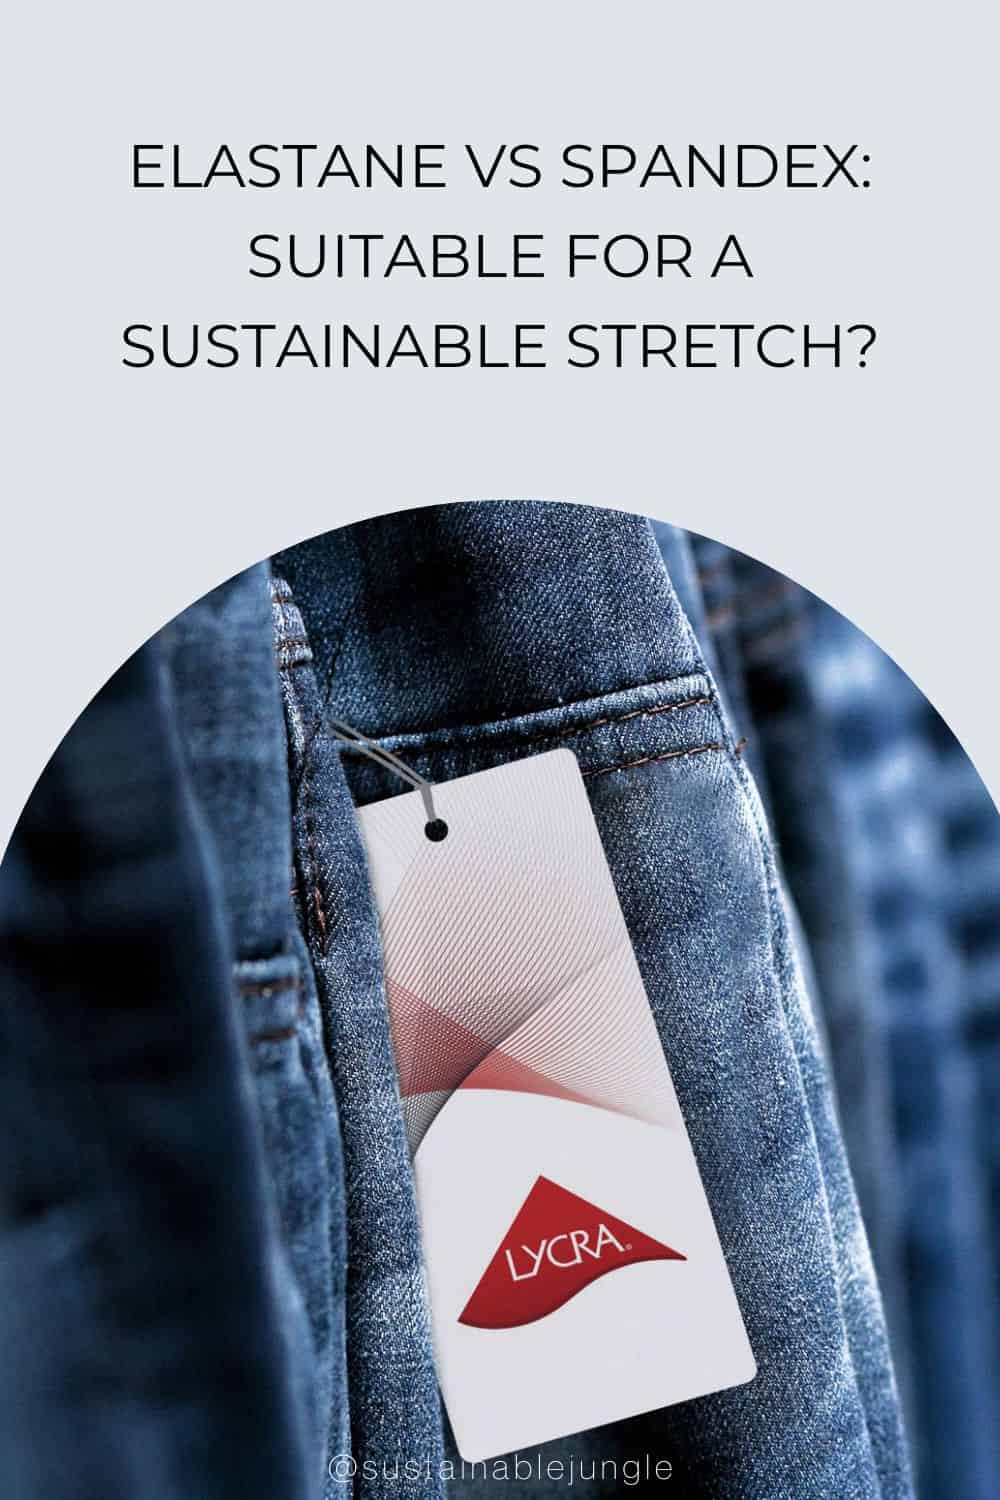 Elastane Vs Spandex: Suitable For A Sustainable Stretch? Image by LYCRA #elastanevsspandex #elastanevsspandexvslycra #elastanefabric #what is elastane #spandexvselastane #sustainablejungle